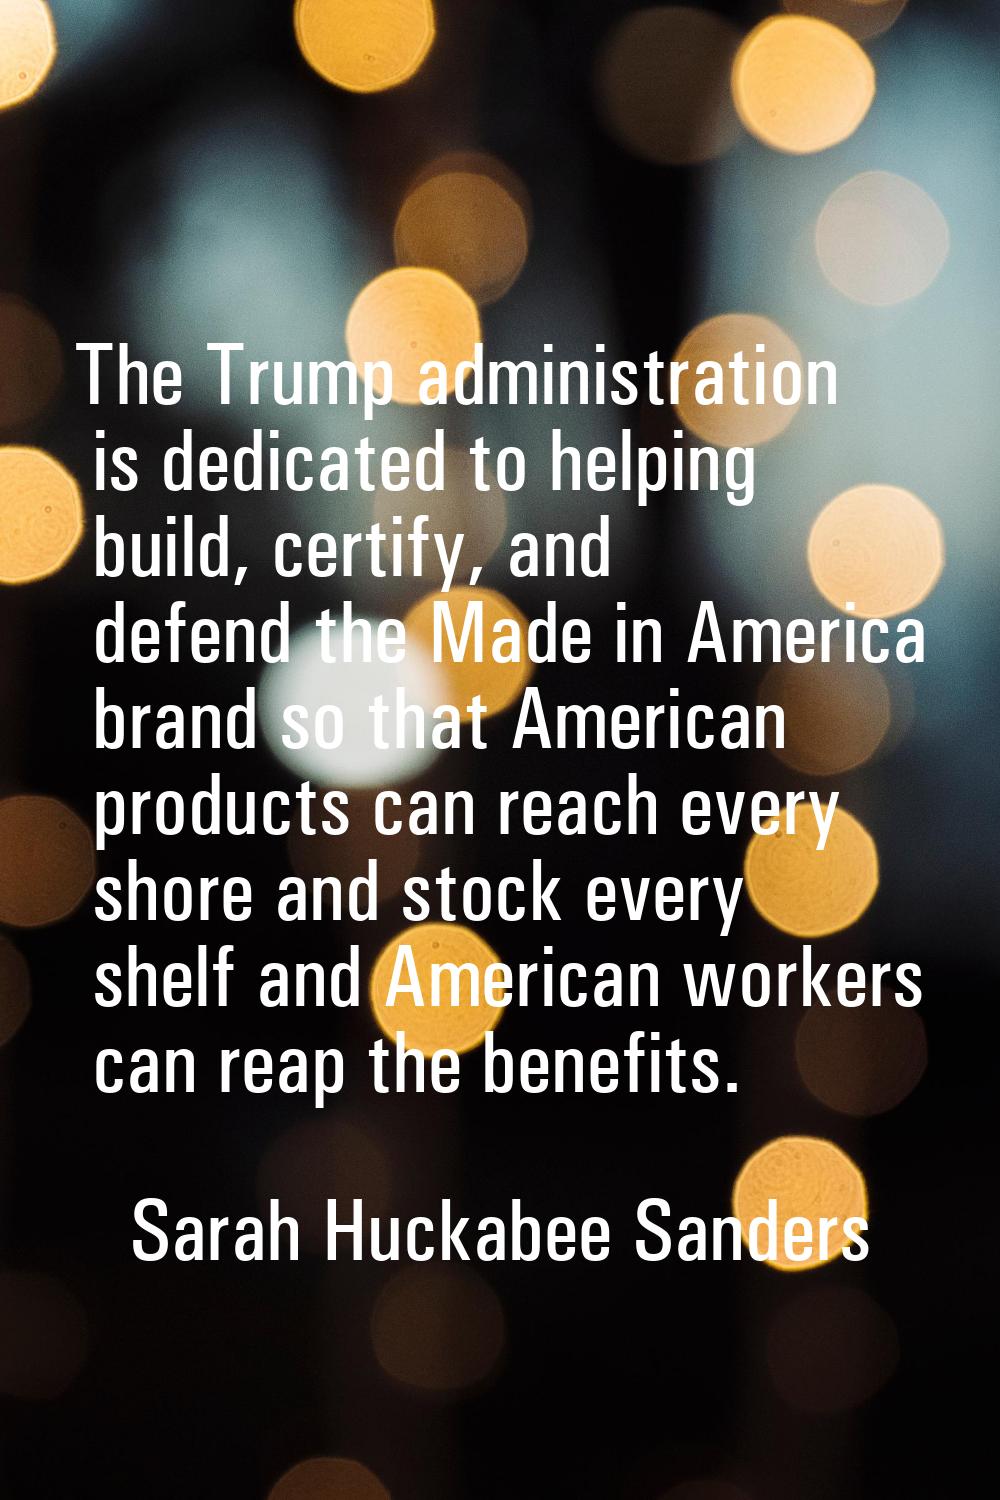 The Trump administration is dedicated to helping build, certify, and defend the Made in America bra